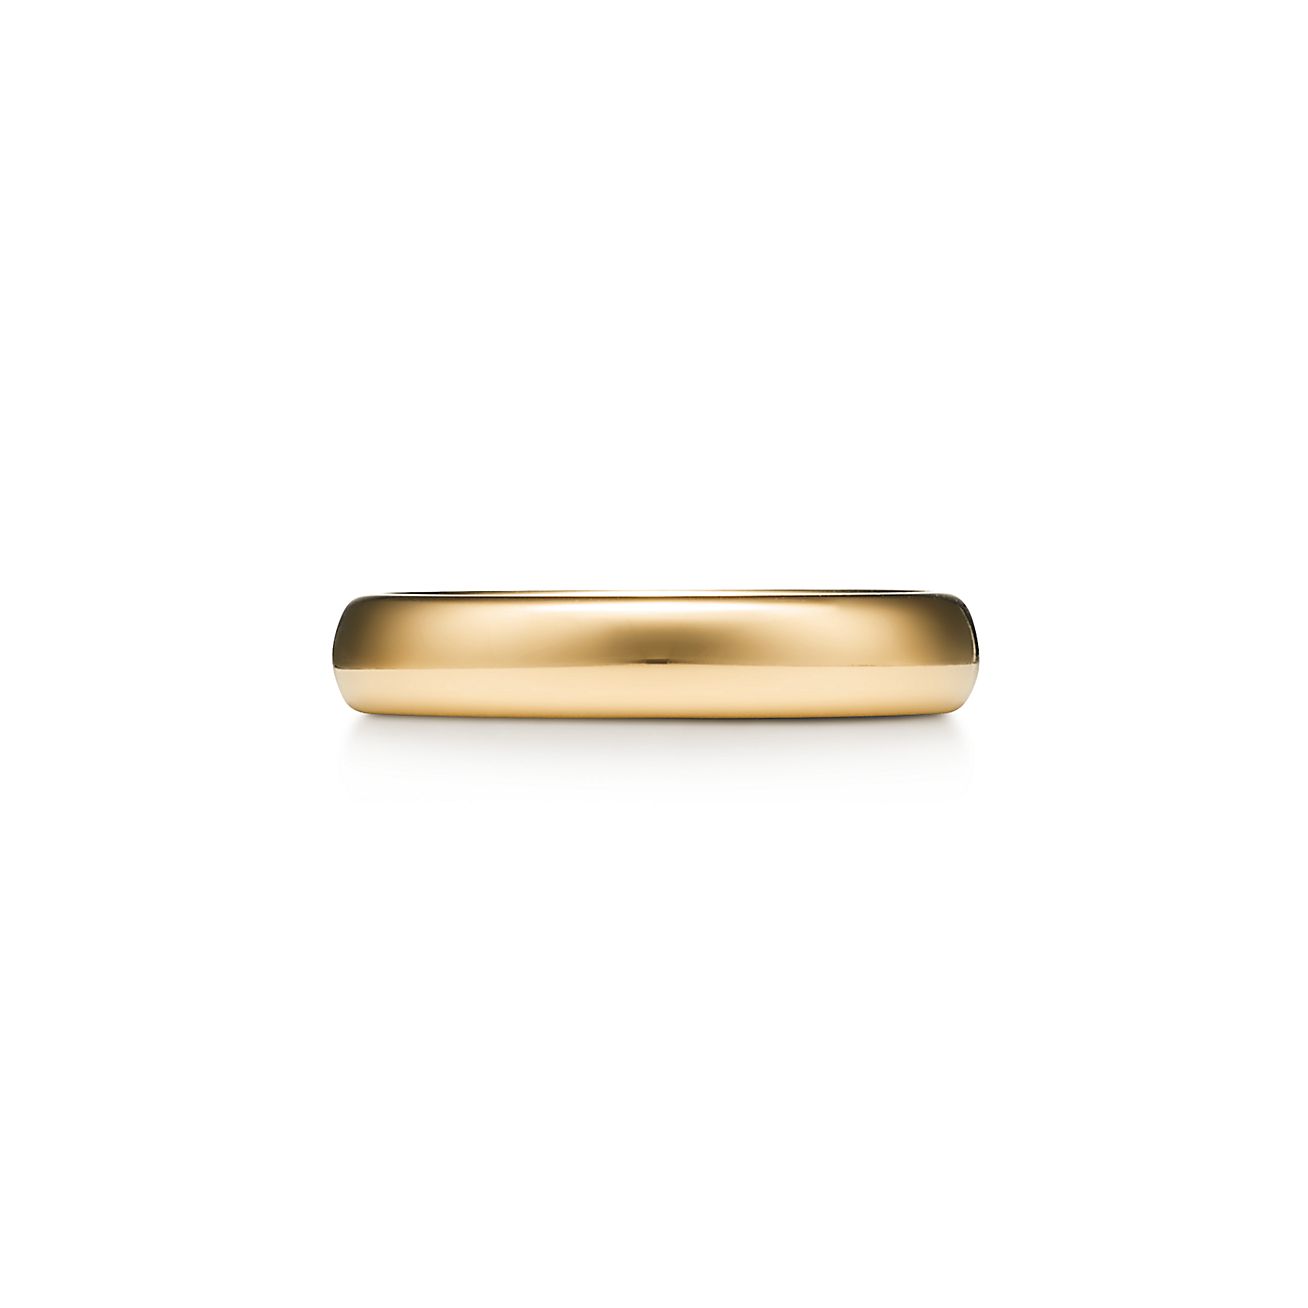 Plain gold band | Gold rings jewelry, Jewelry rings, Gold band wedding ring